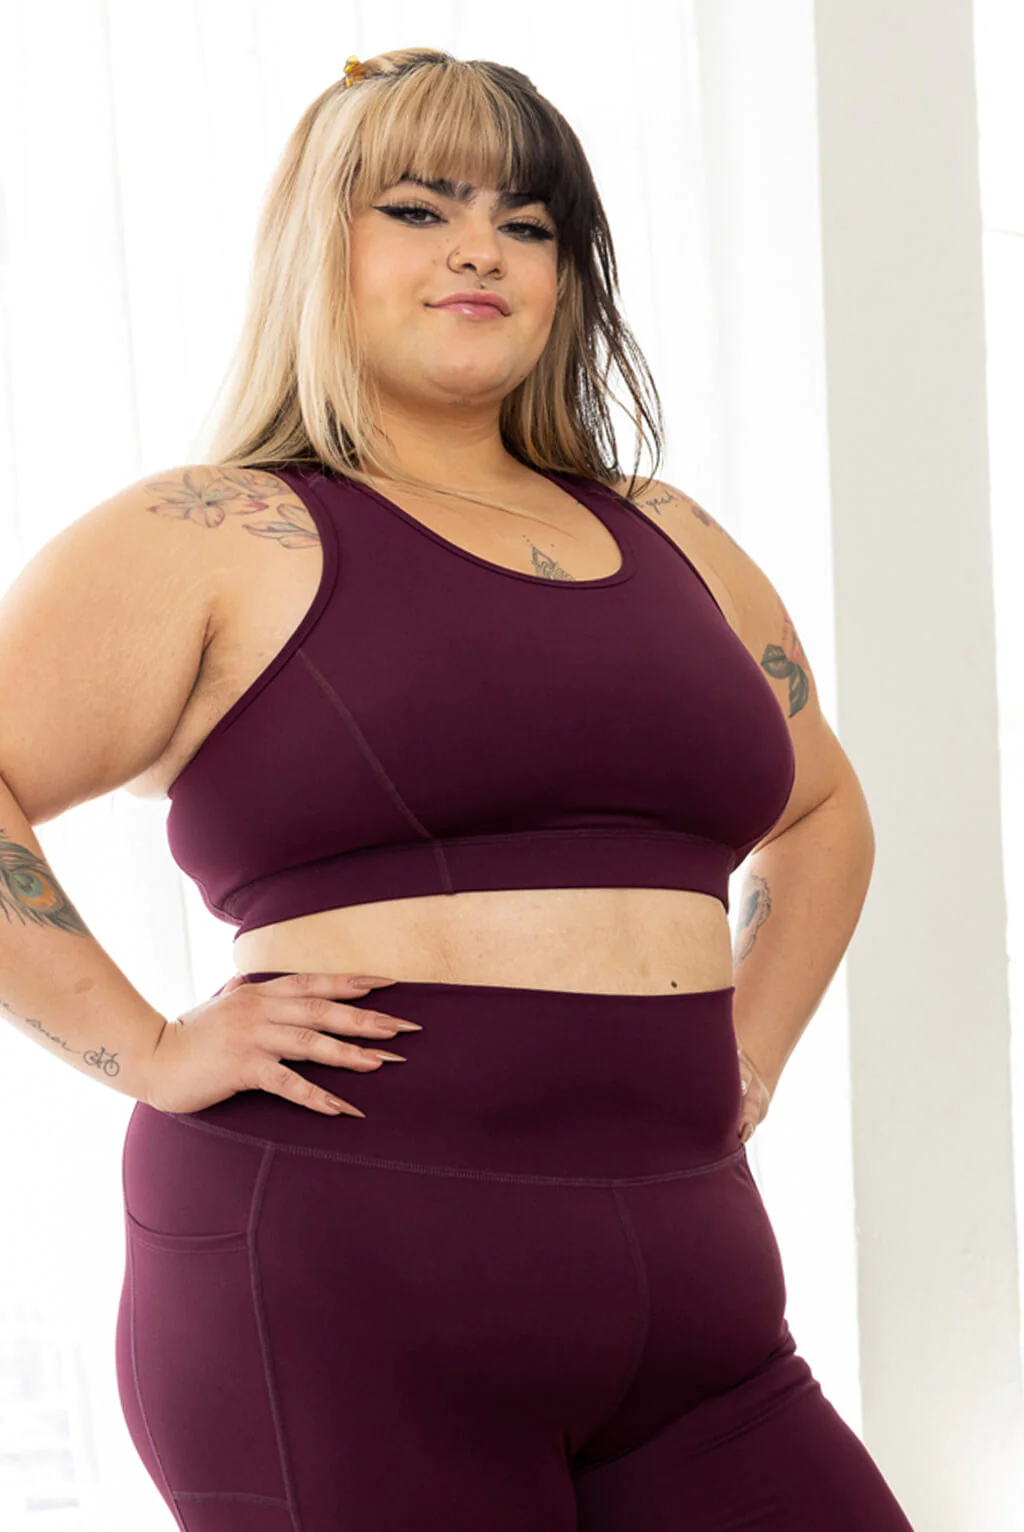 Plus-Size Gym Outfits - From Head To Curve  Plus size gym outfits, Womens workout  outfits, Gym clothes women